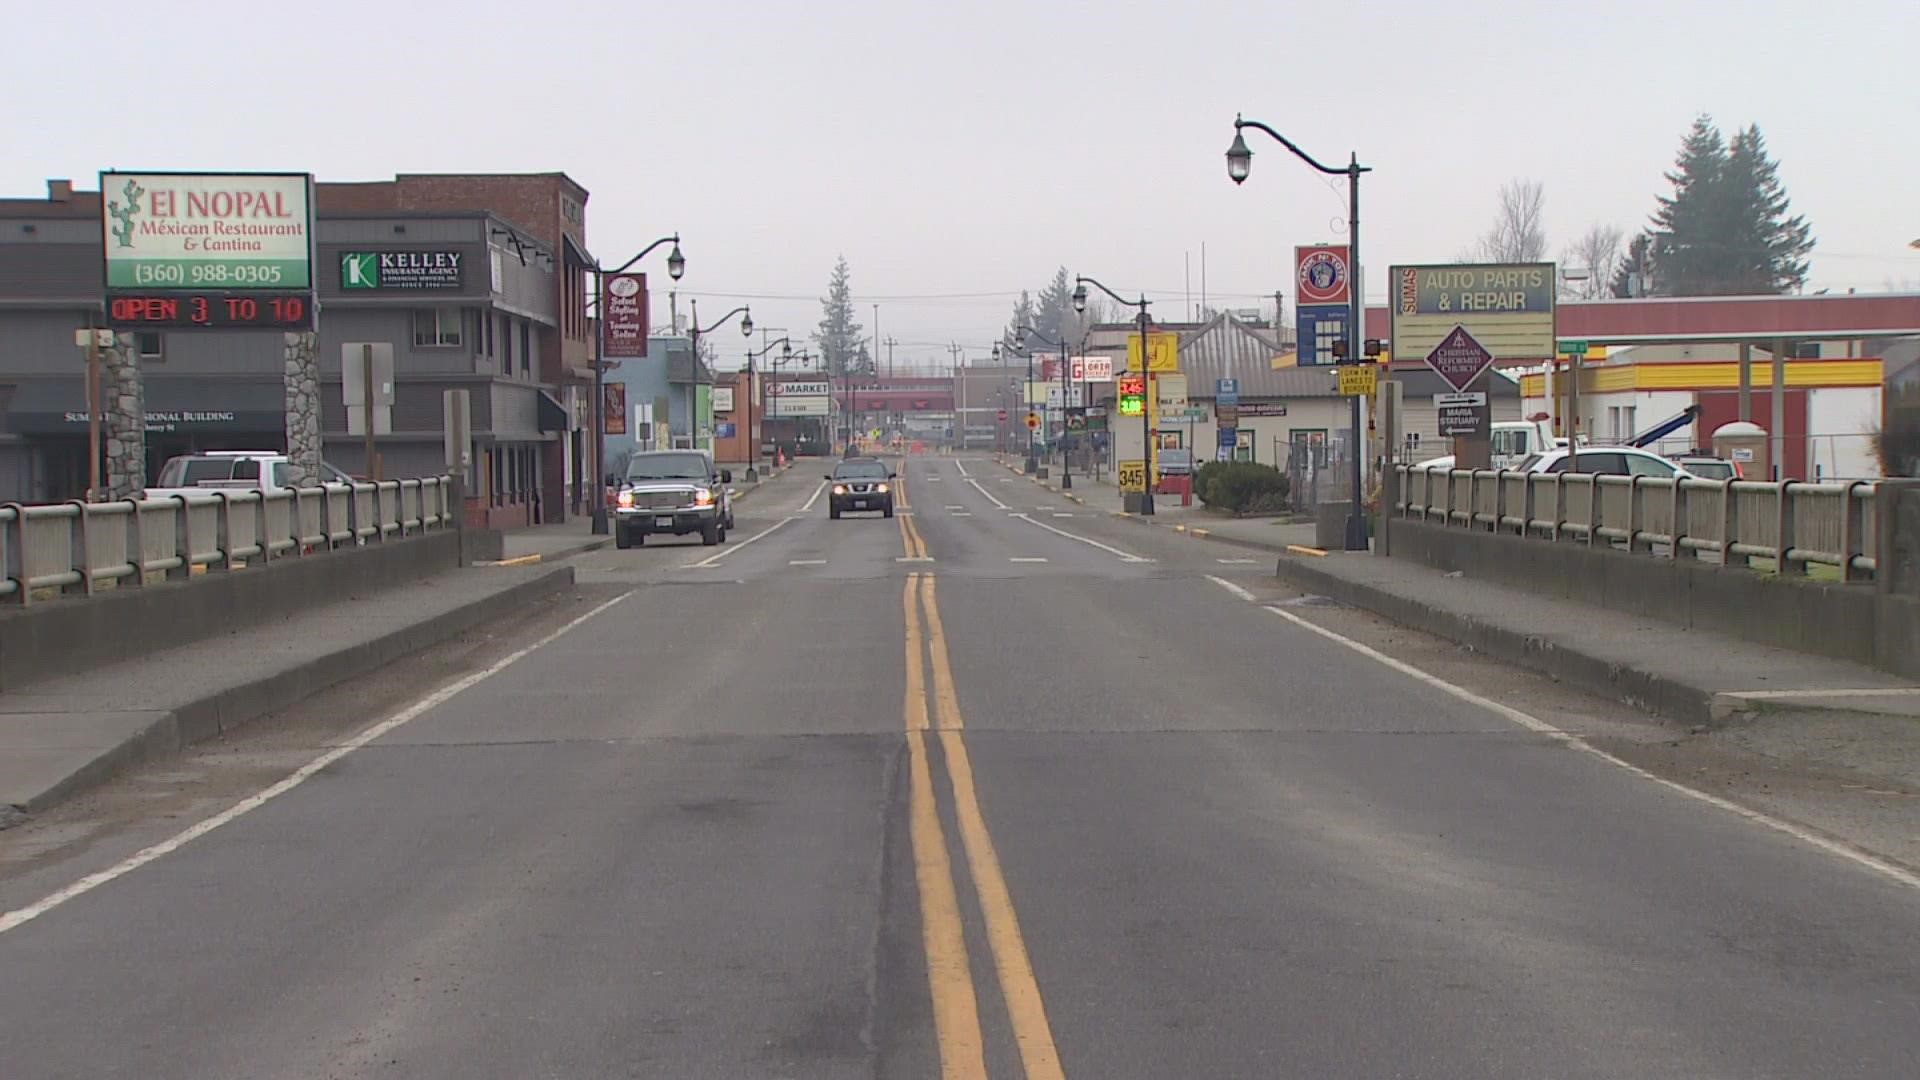 Businesses continue to close in Sumas. Those that remain are struggling to bring in customers.